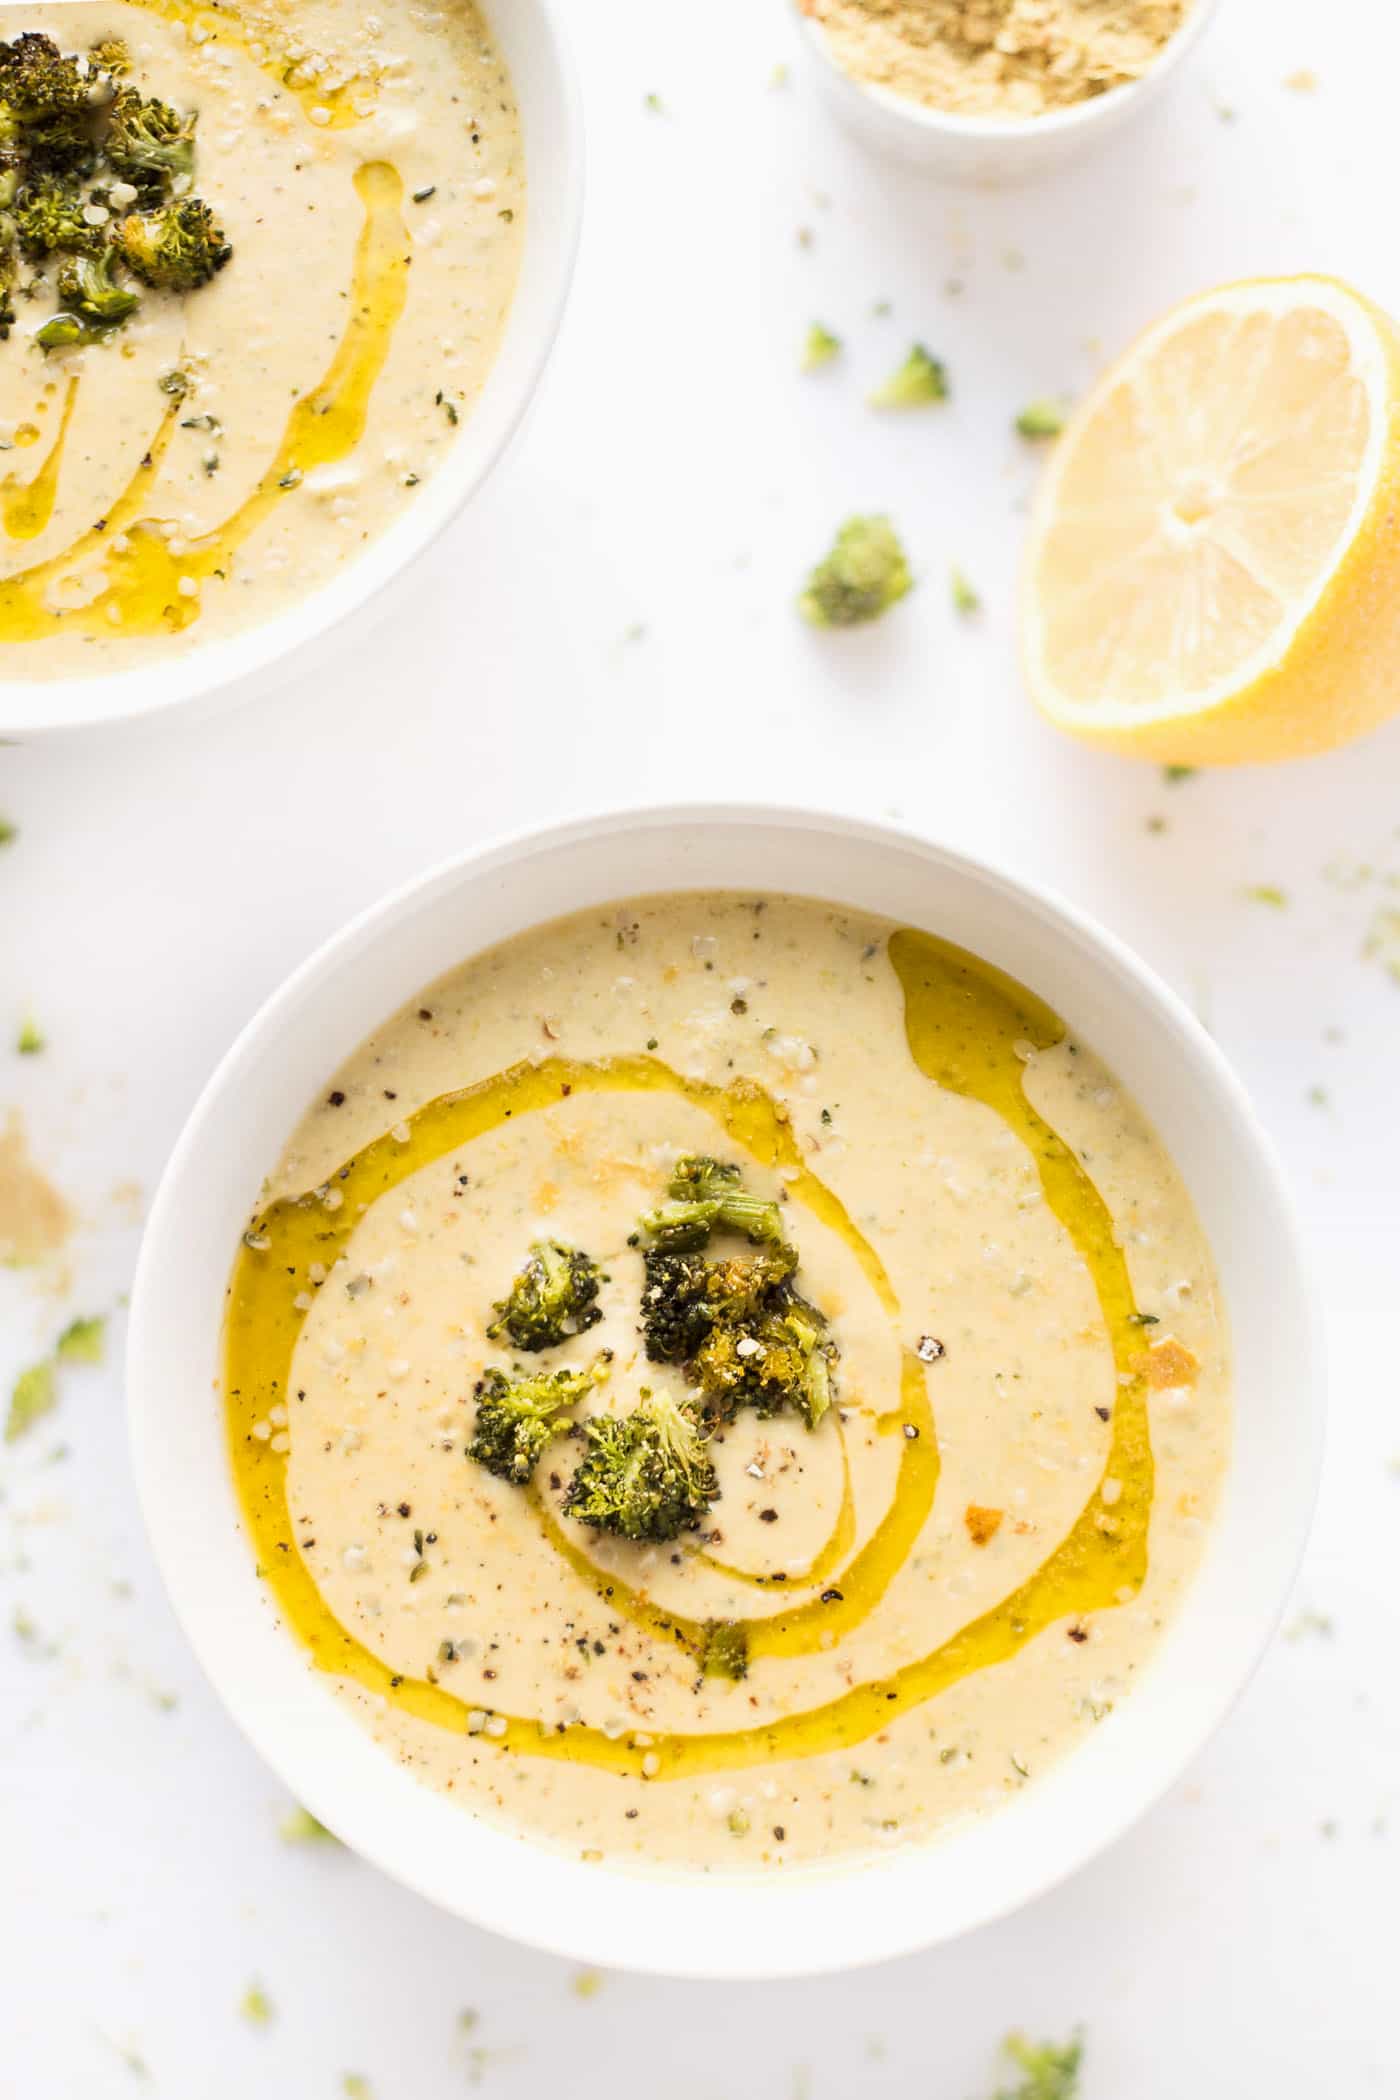 Delicious and super easy to make, this 30 MINUTE broccoli chowder is made with roasted broccoli, cashews and potatoes. Check out!